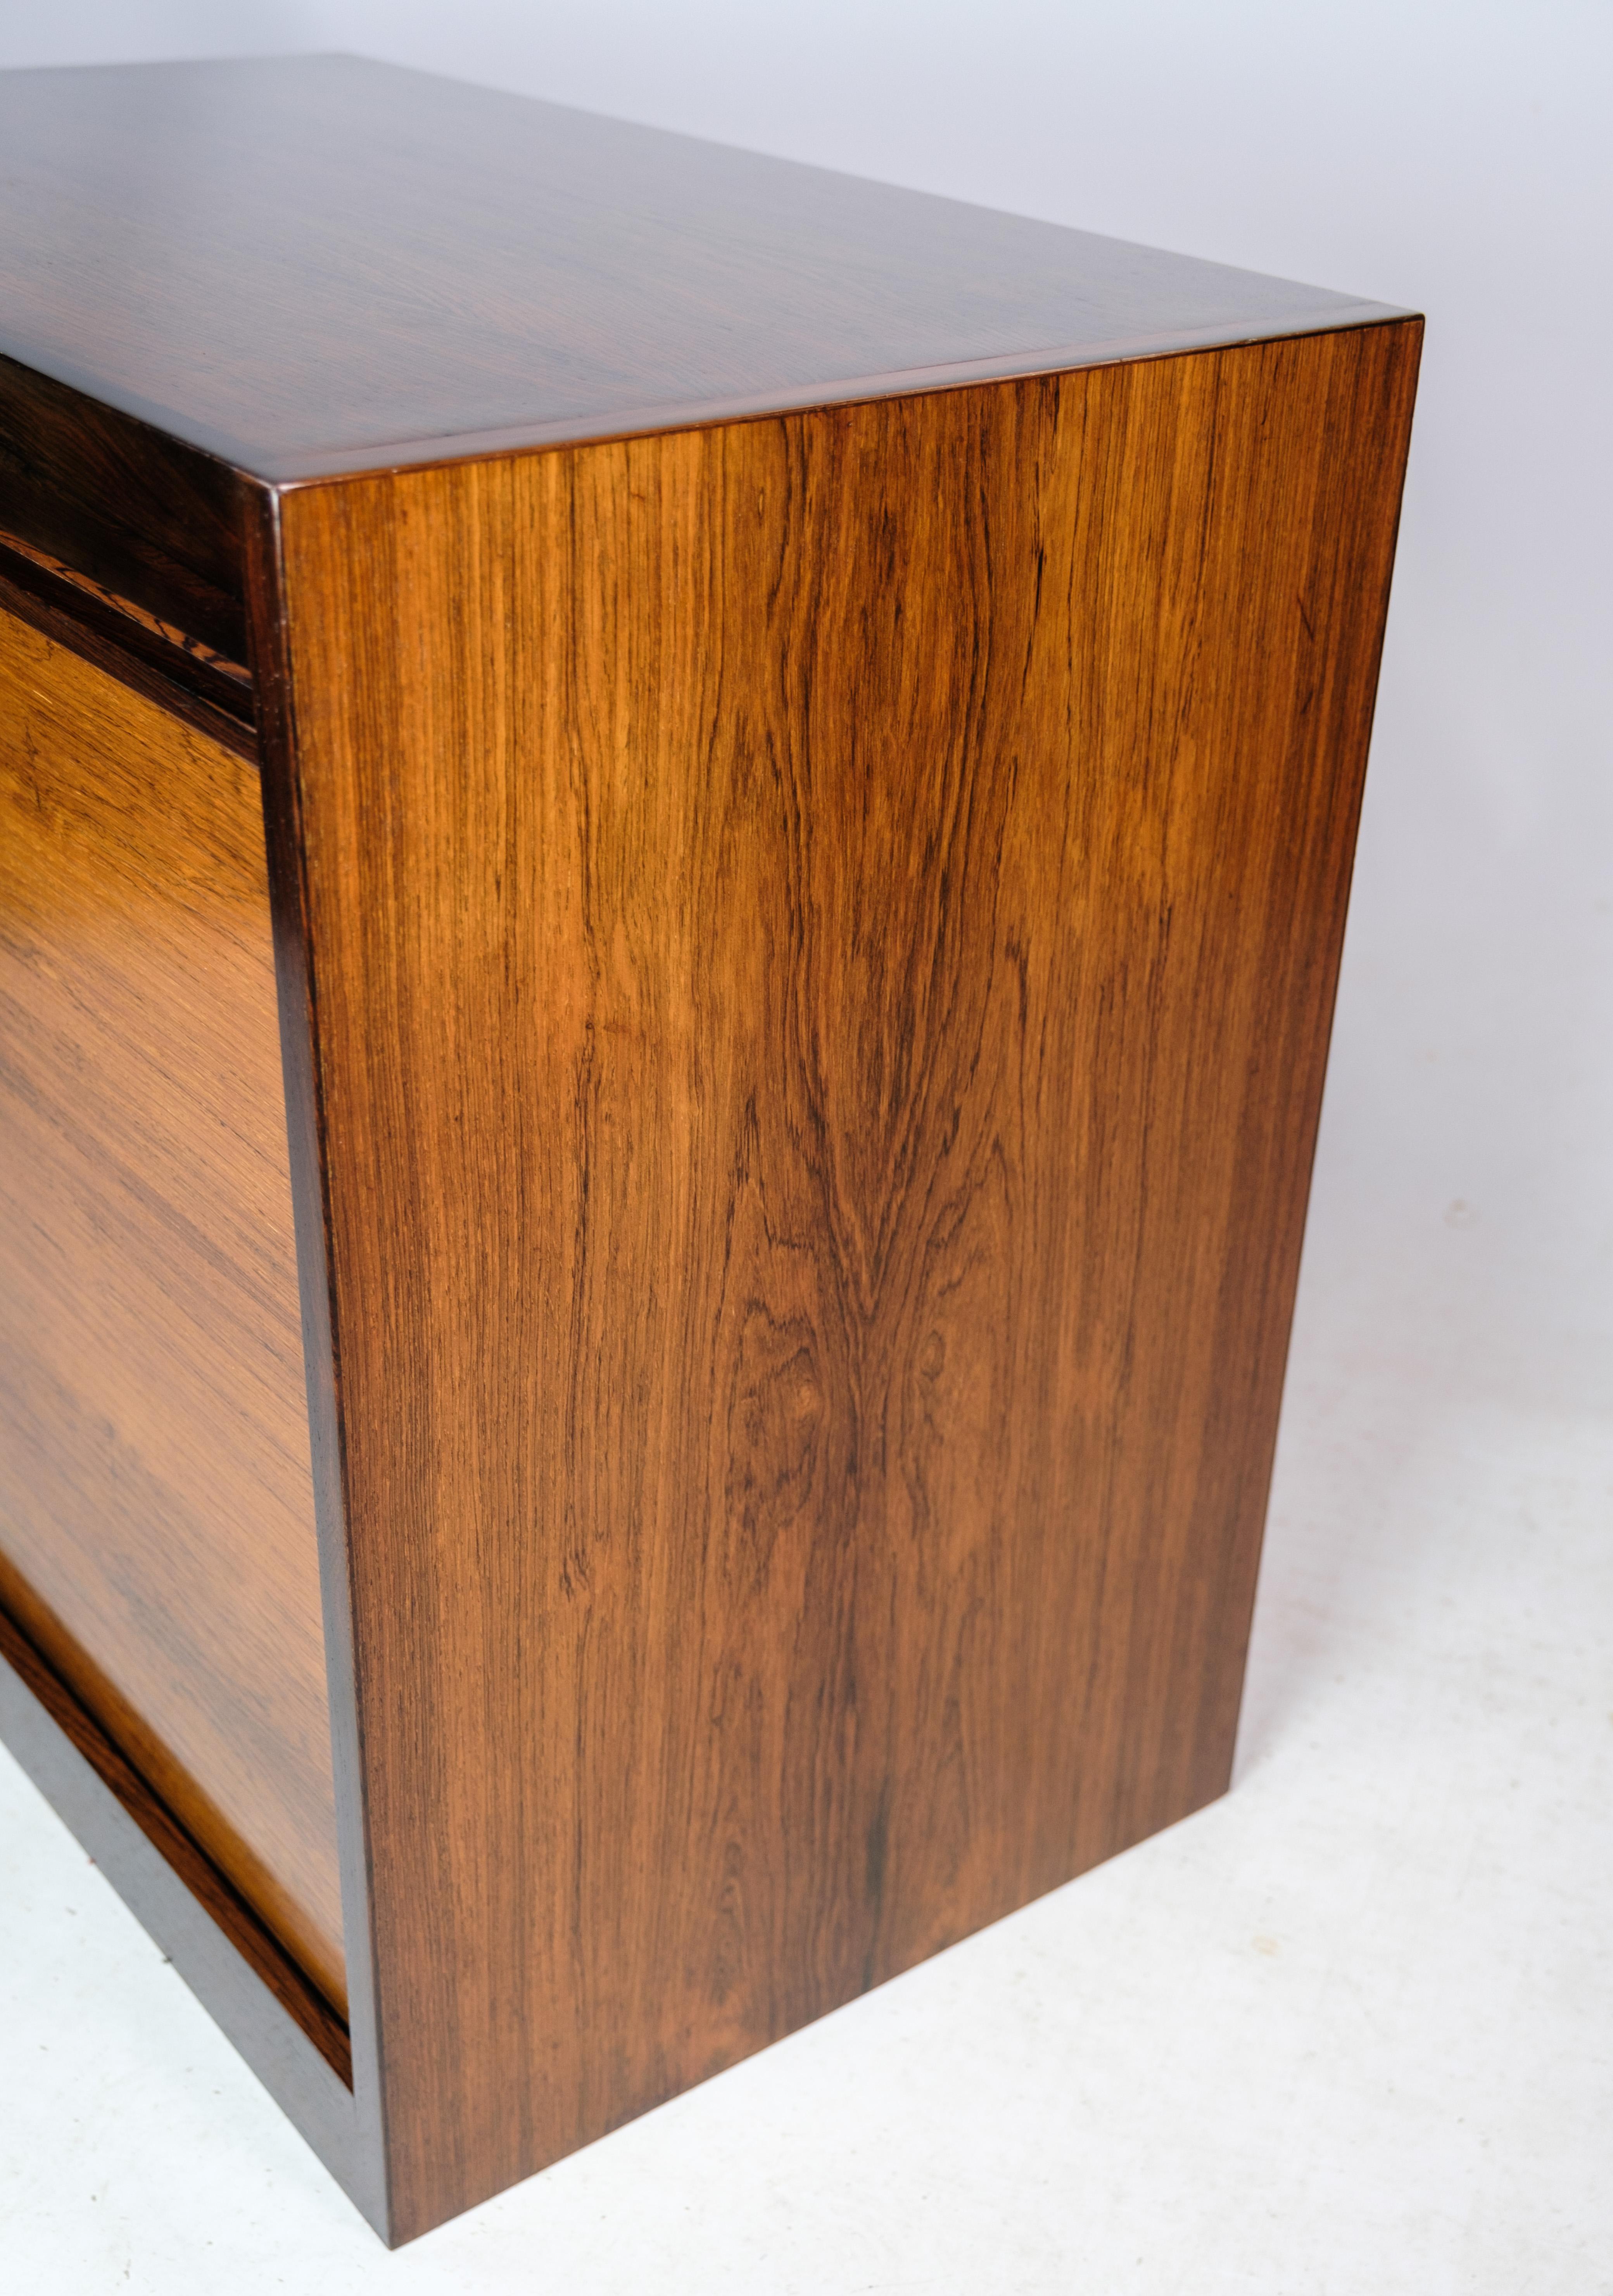 Cabinet with Pull-Up Door in Rosewood of Danish Design from the 1960s For Sale 2